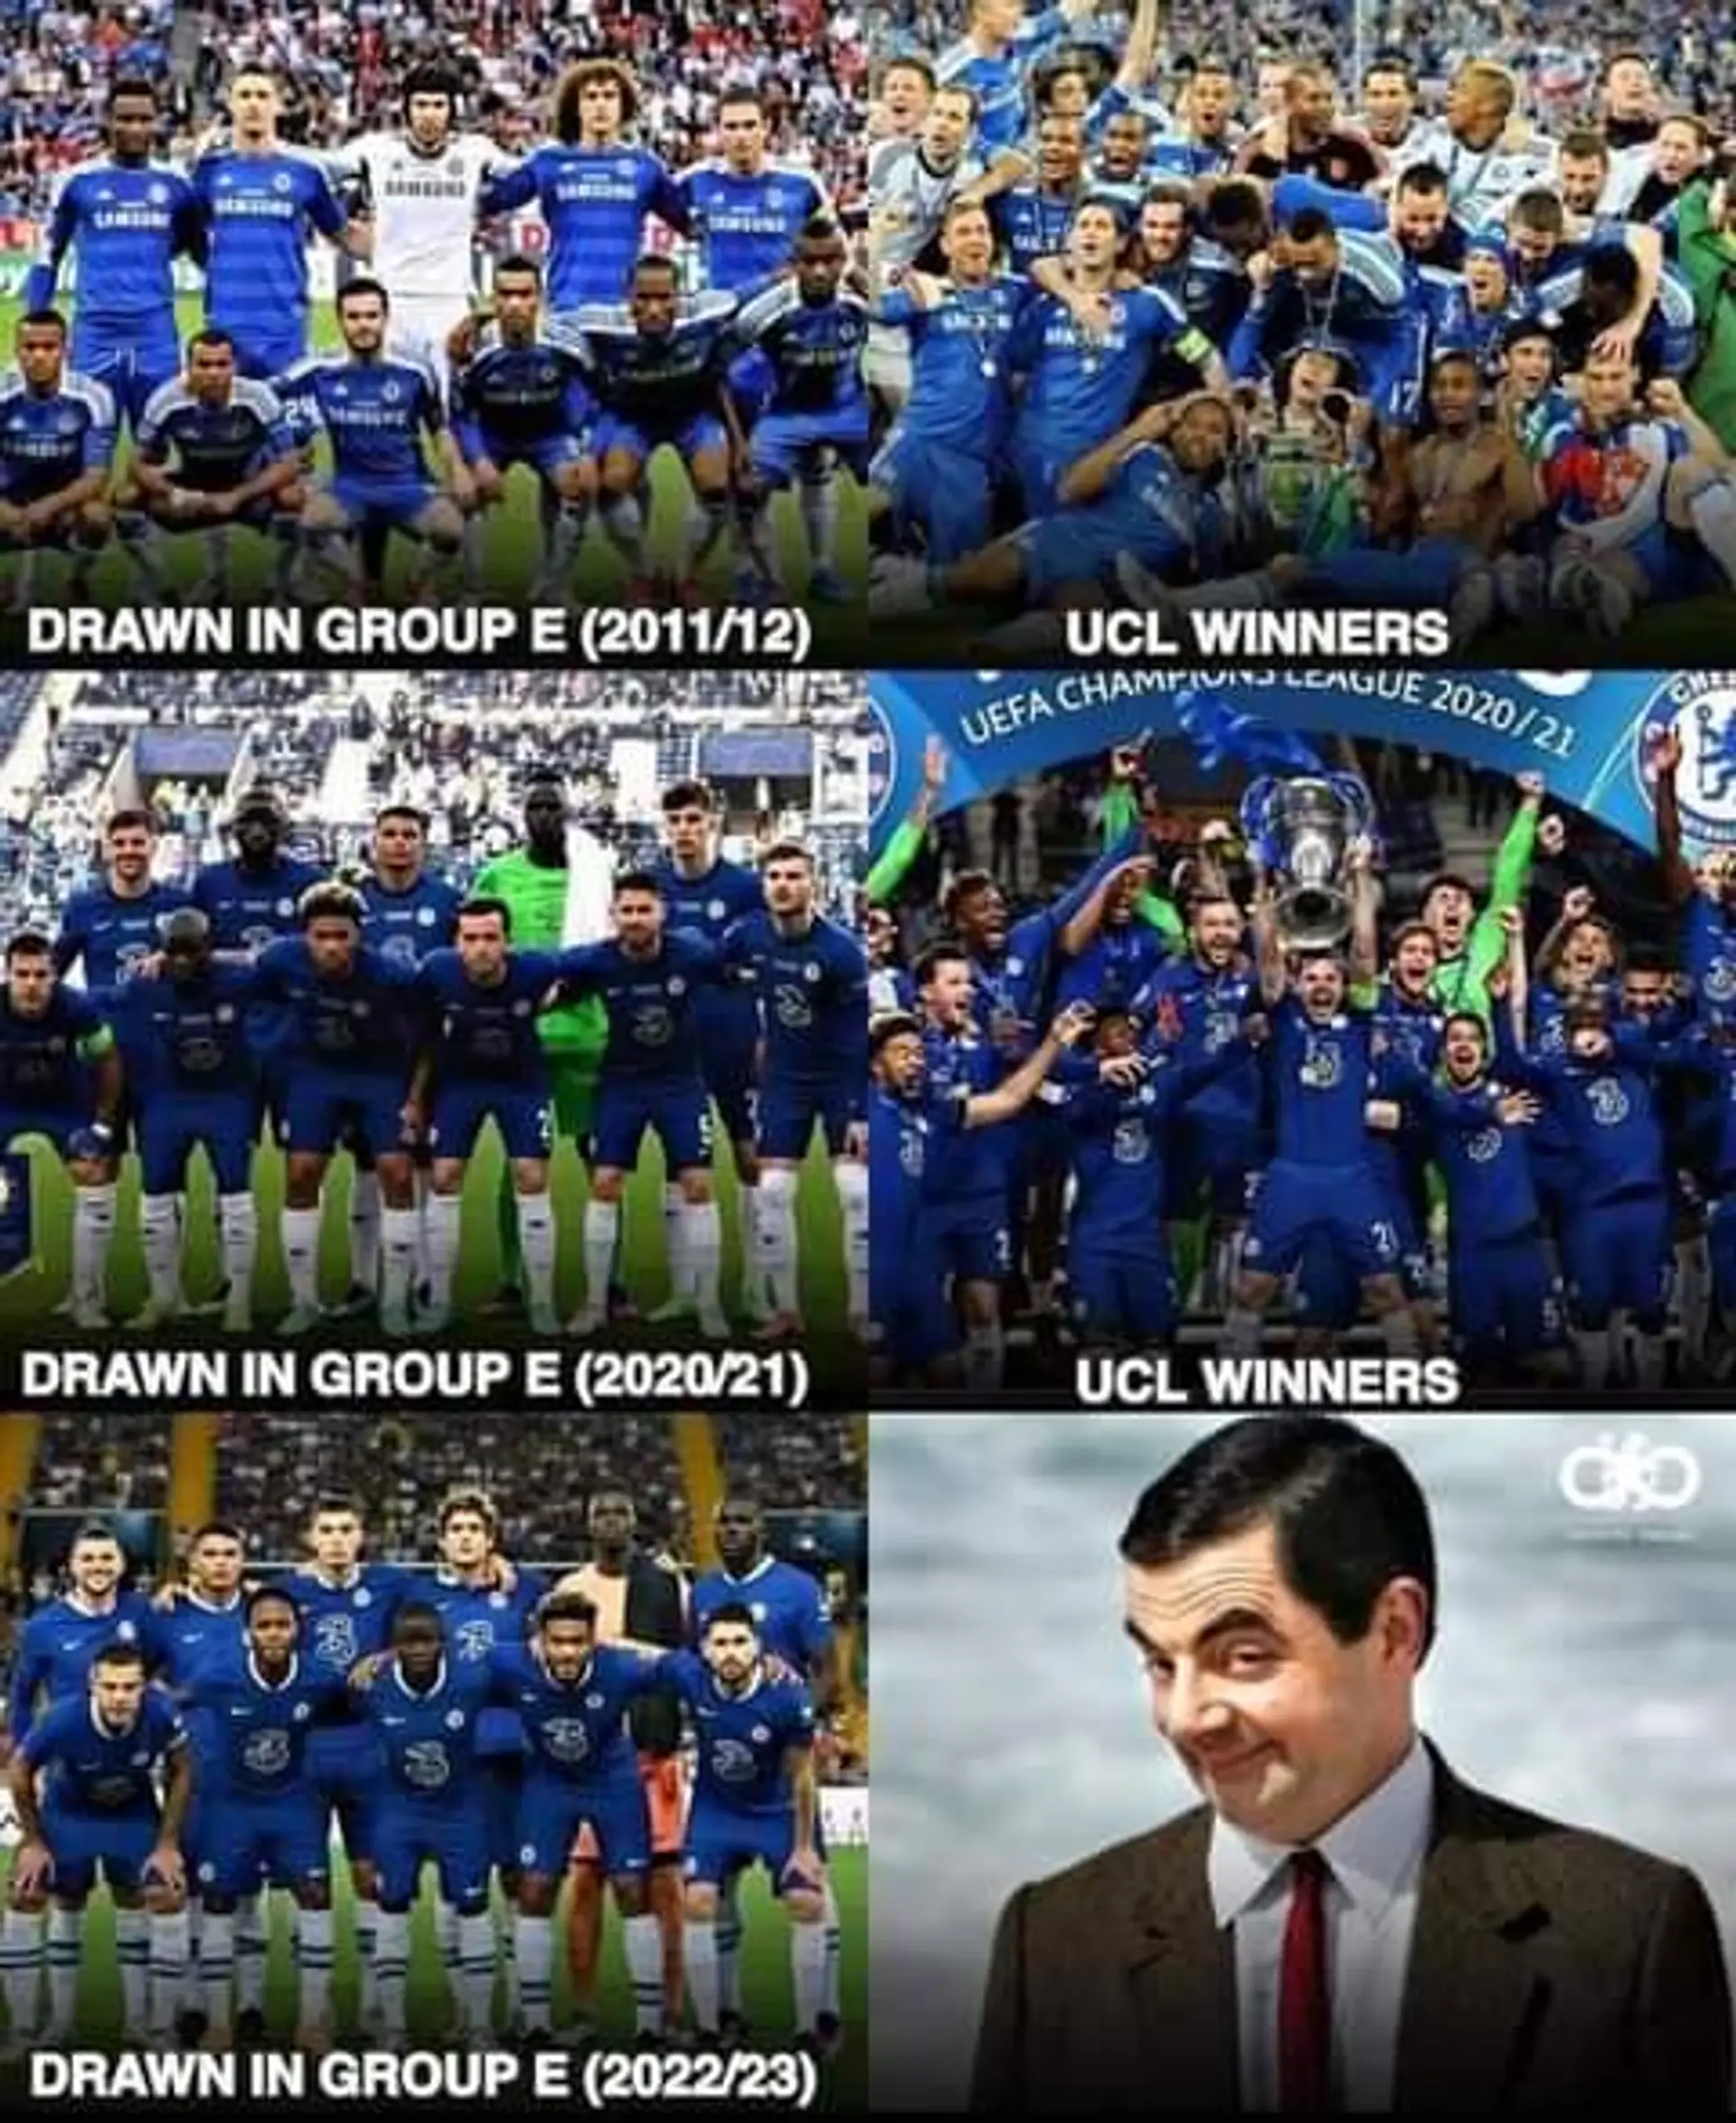 Chelsea Group - E miracles for the EuropeanChampion League Group stage Matches